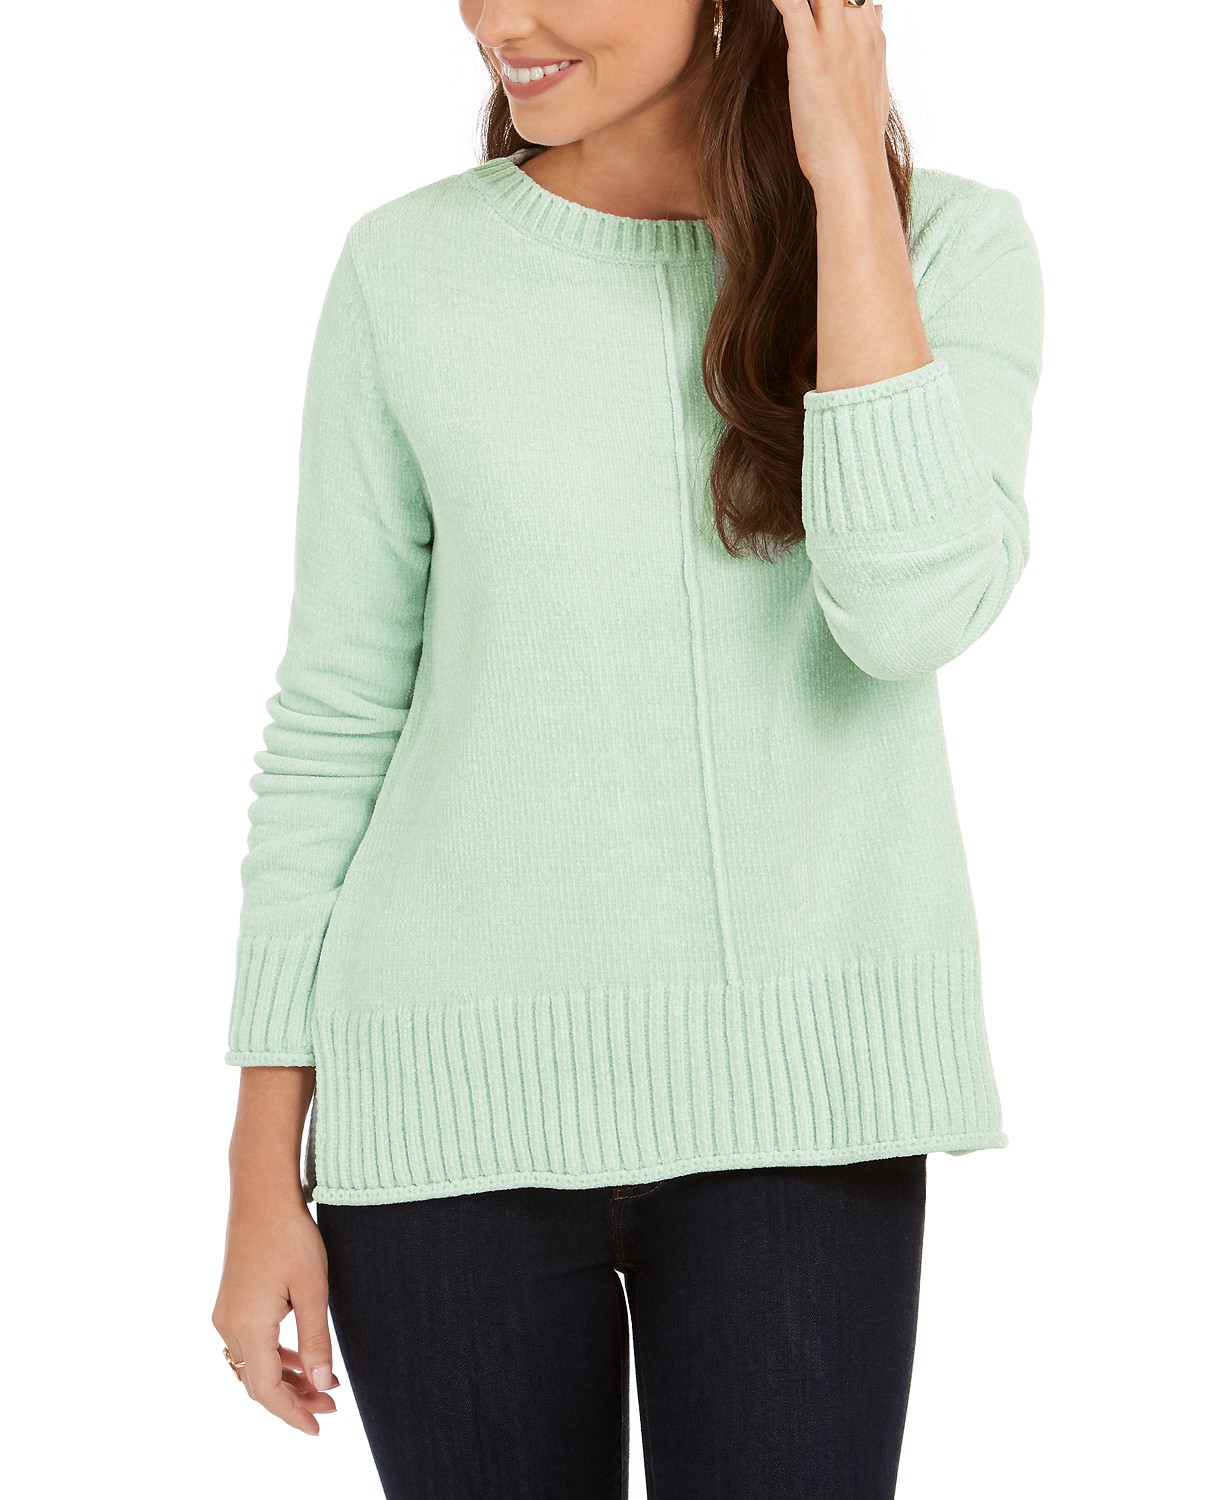 woocommerce-673321-2209615.cloudwaysapps.com-style-amp-co-womens-green-chenille-sweater